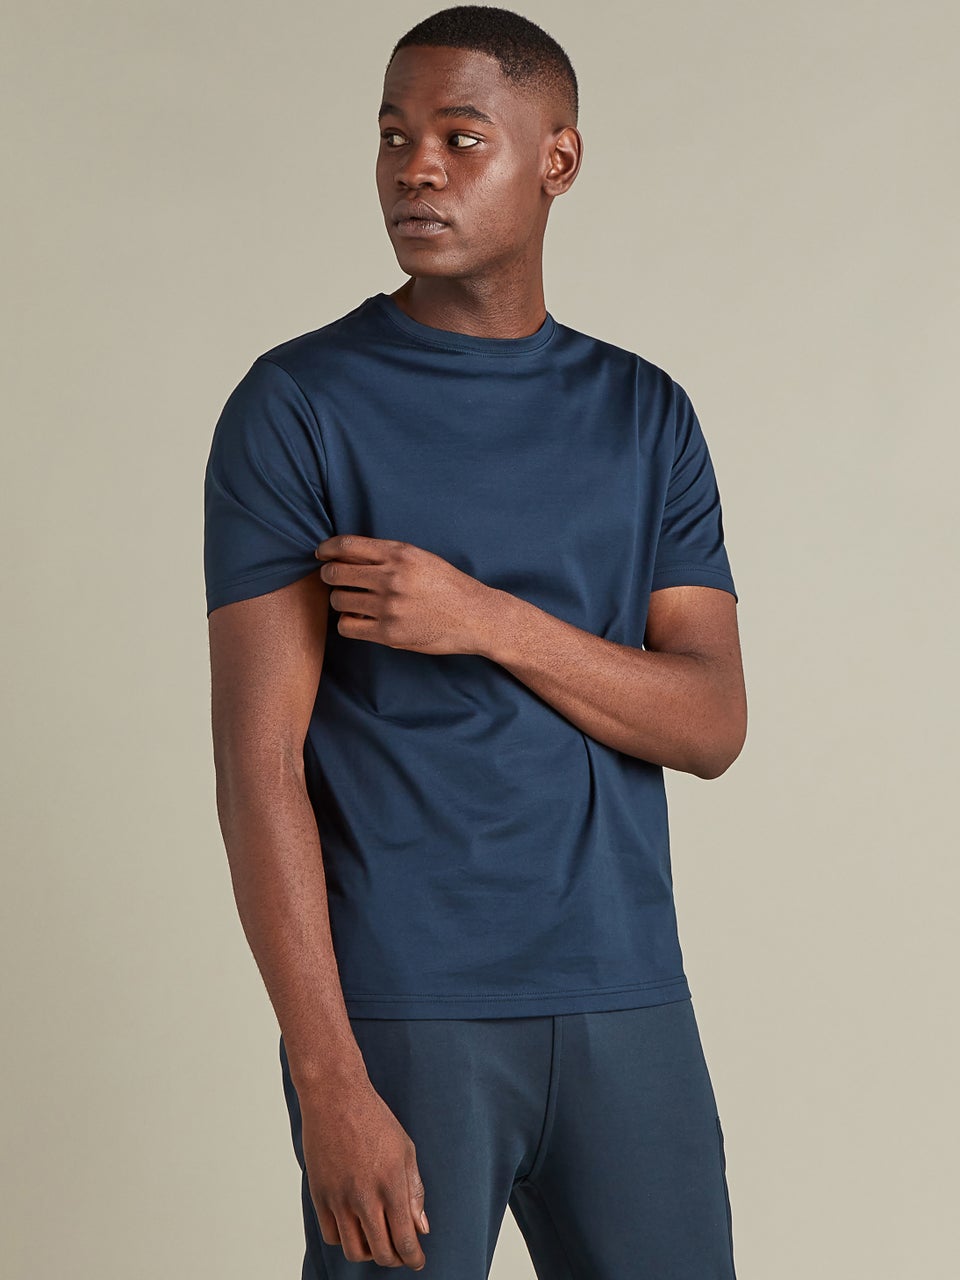 In Motion performance pique t-shirt T-shirt Navy